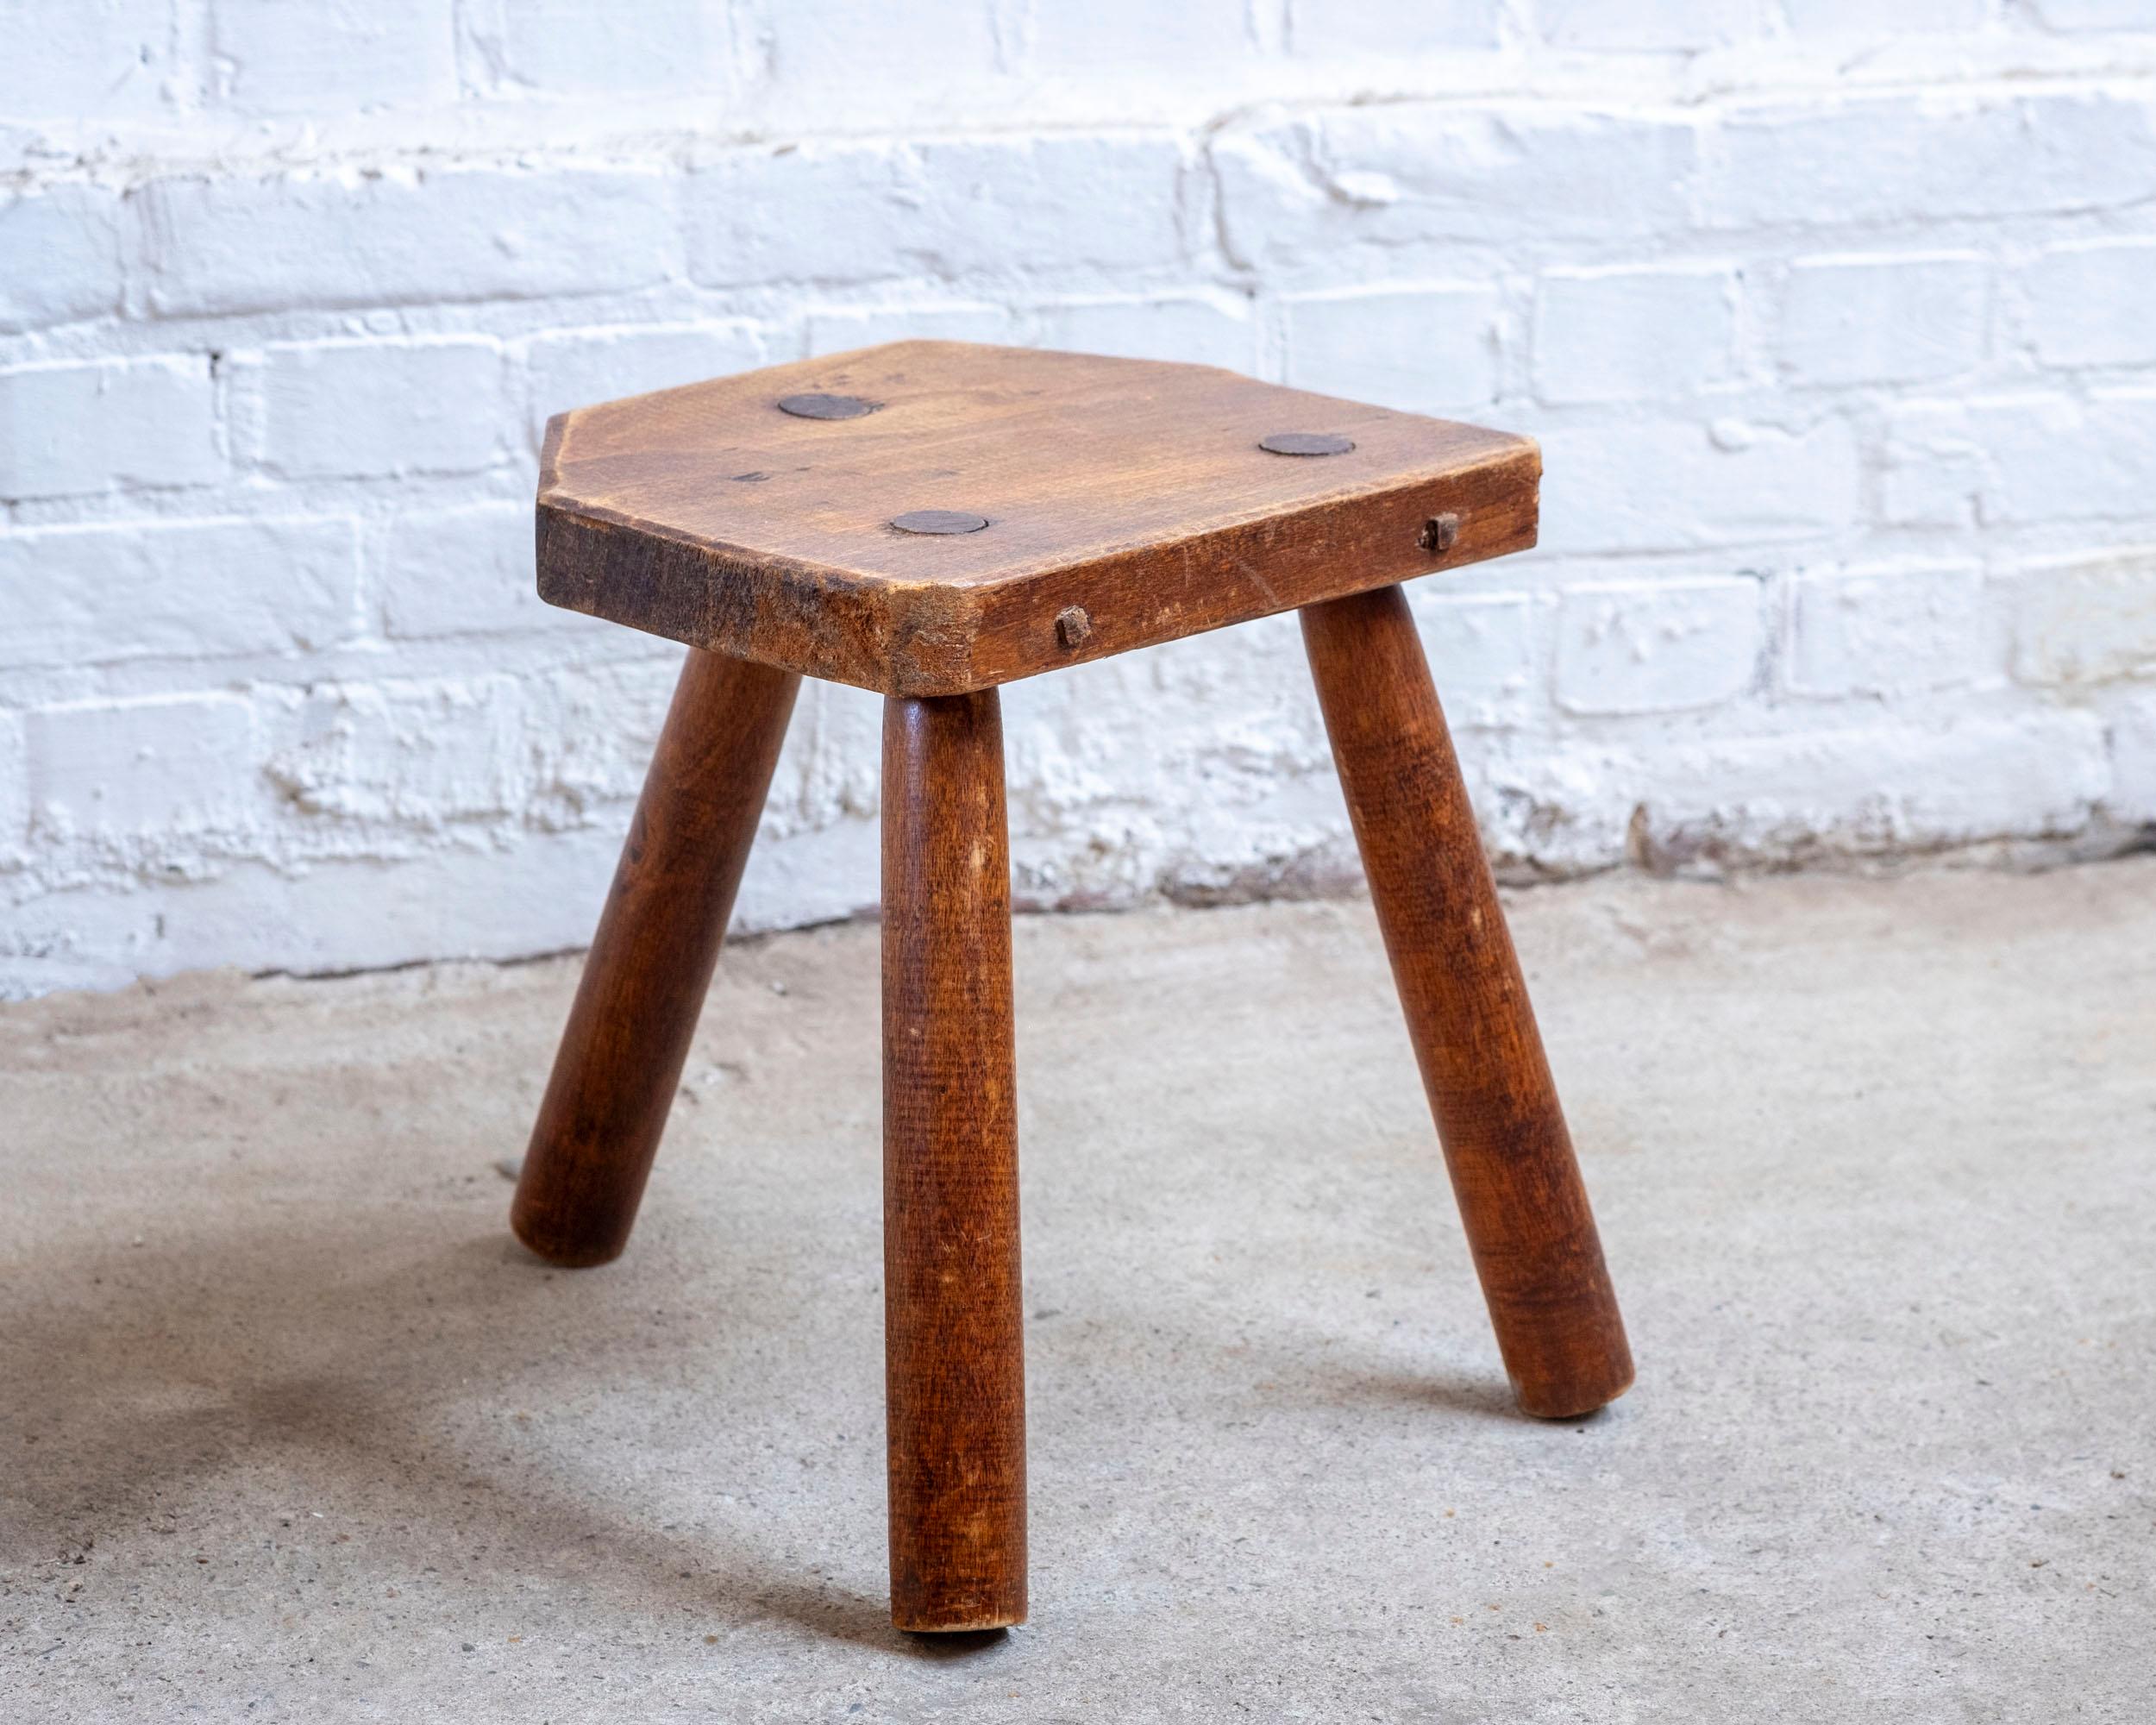 French artisan wooden tripod stool, handcrafted by a French woodworker using traditional woodworking techniques and joinery.
Made from solid wood, this small stool is a timeless piece that can be used either as low stool or side table. The